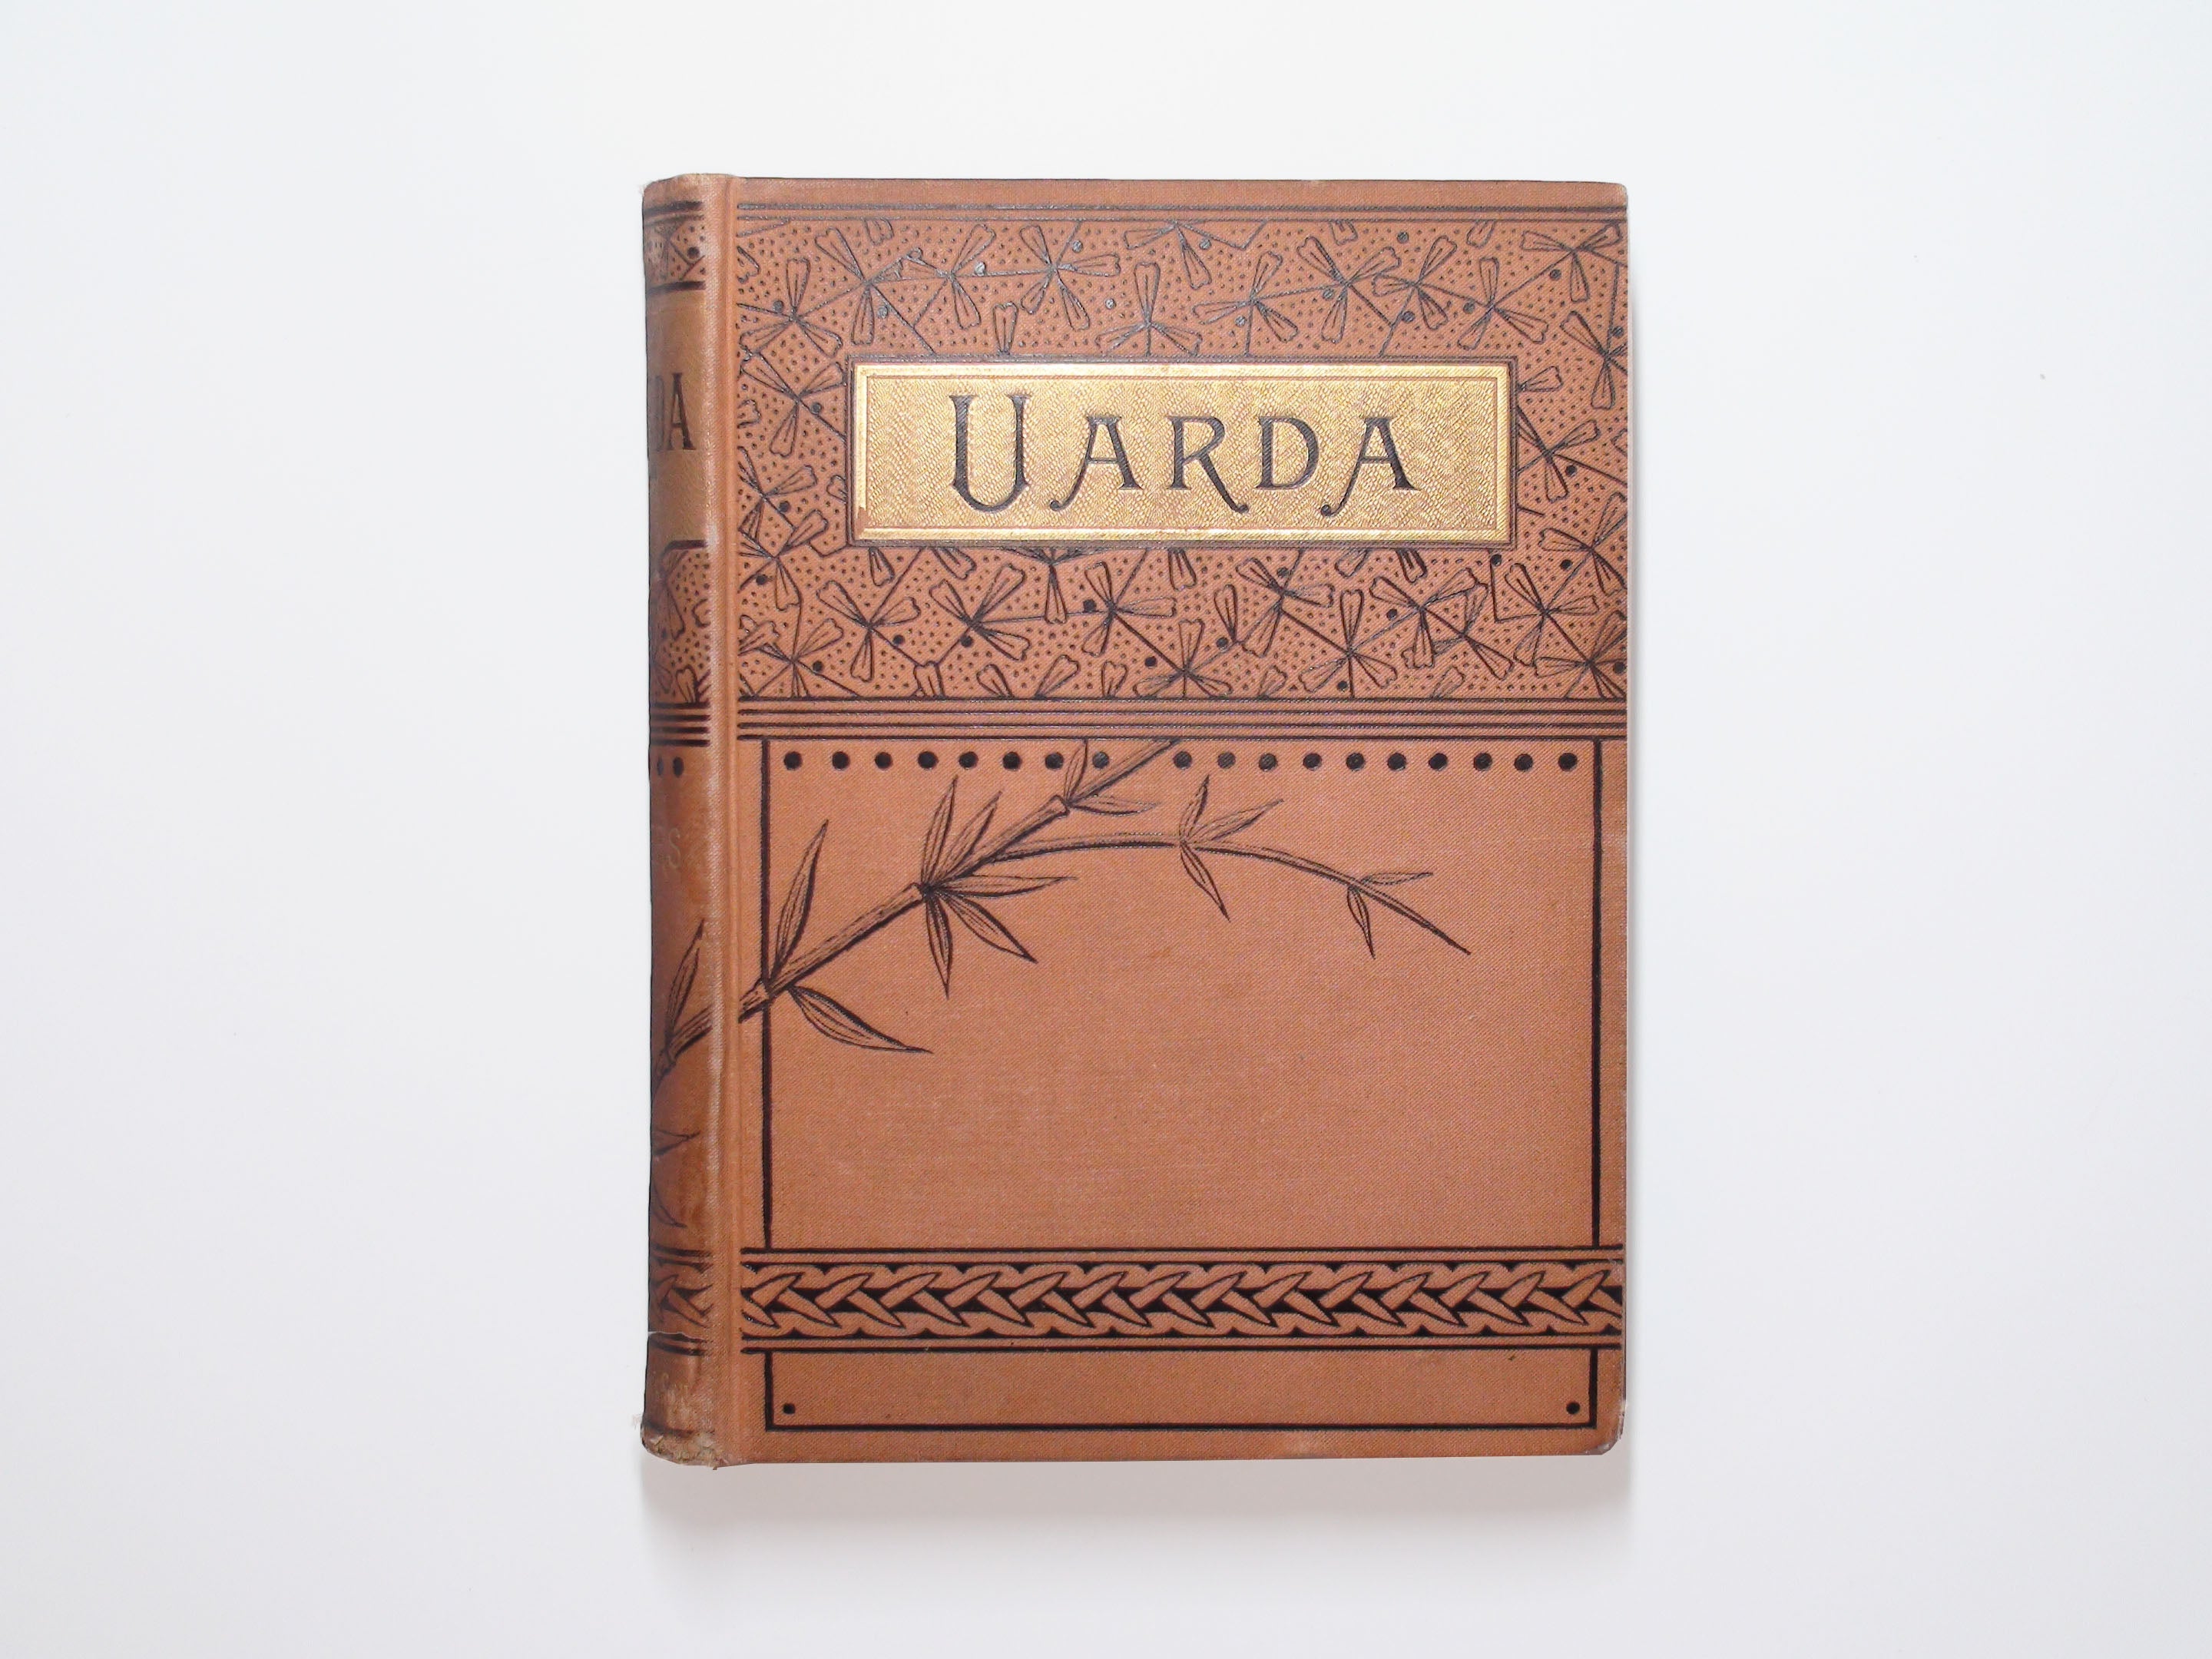 Uarda, A Romance of Ancient Egypt, by George Ebers, Victorian Binding, 1882